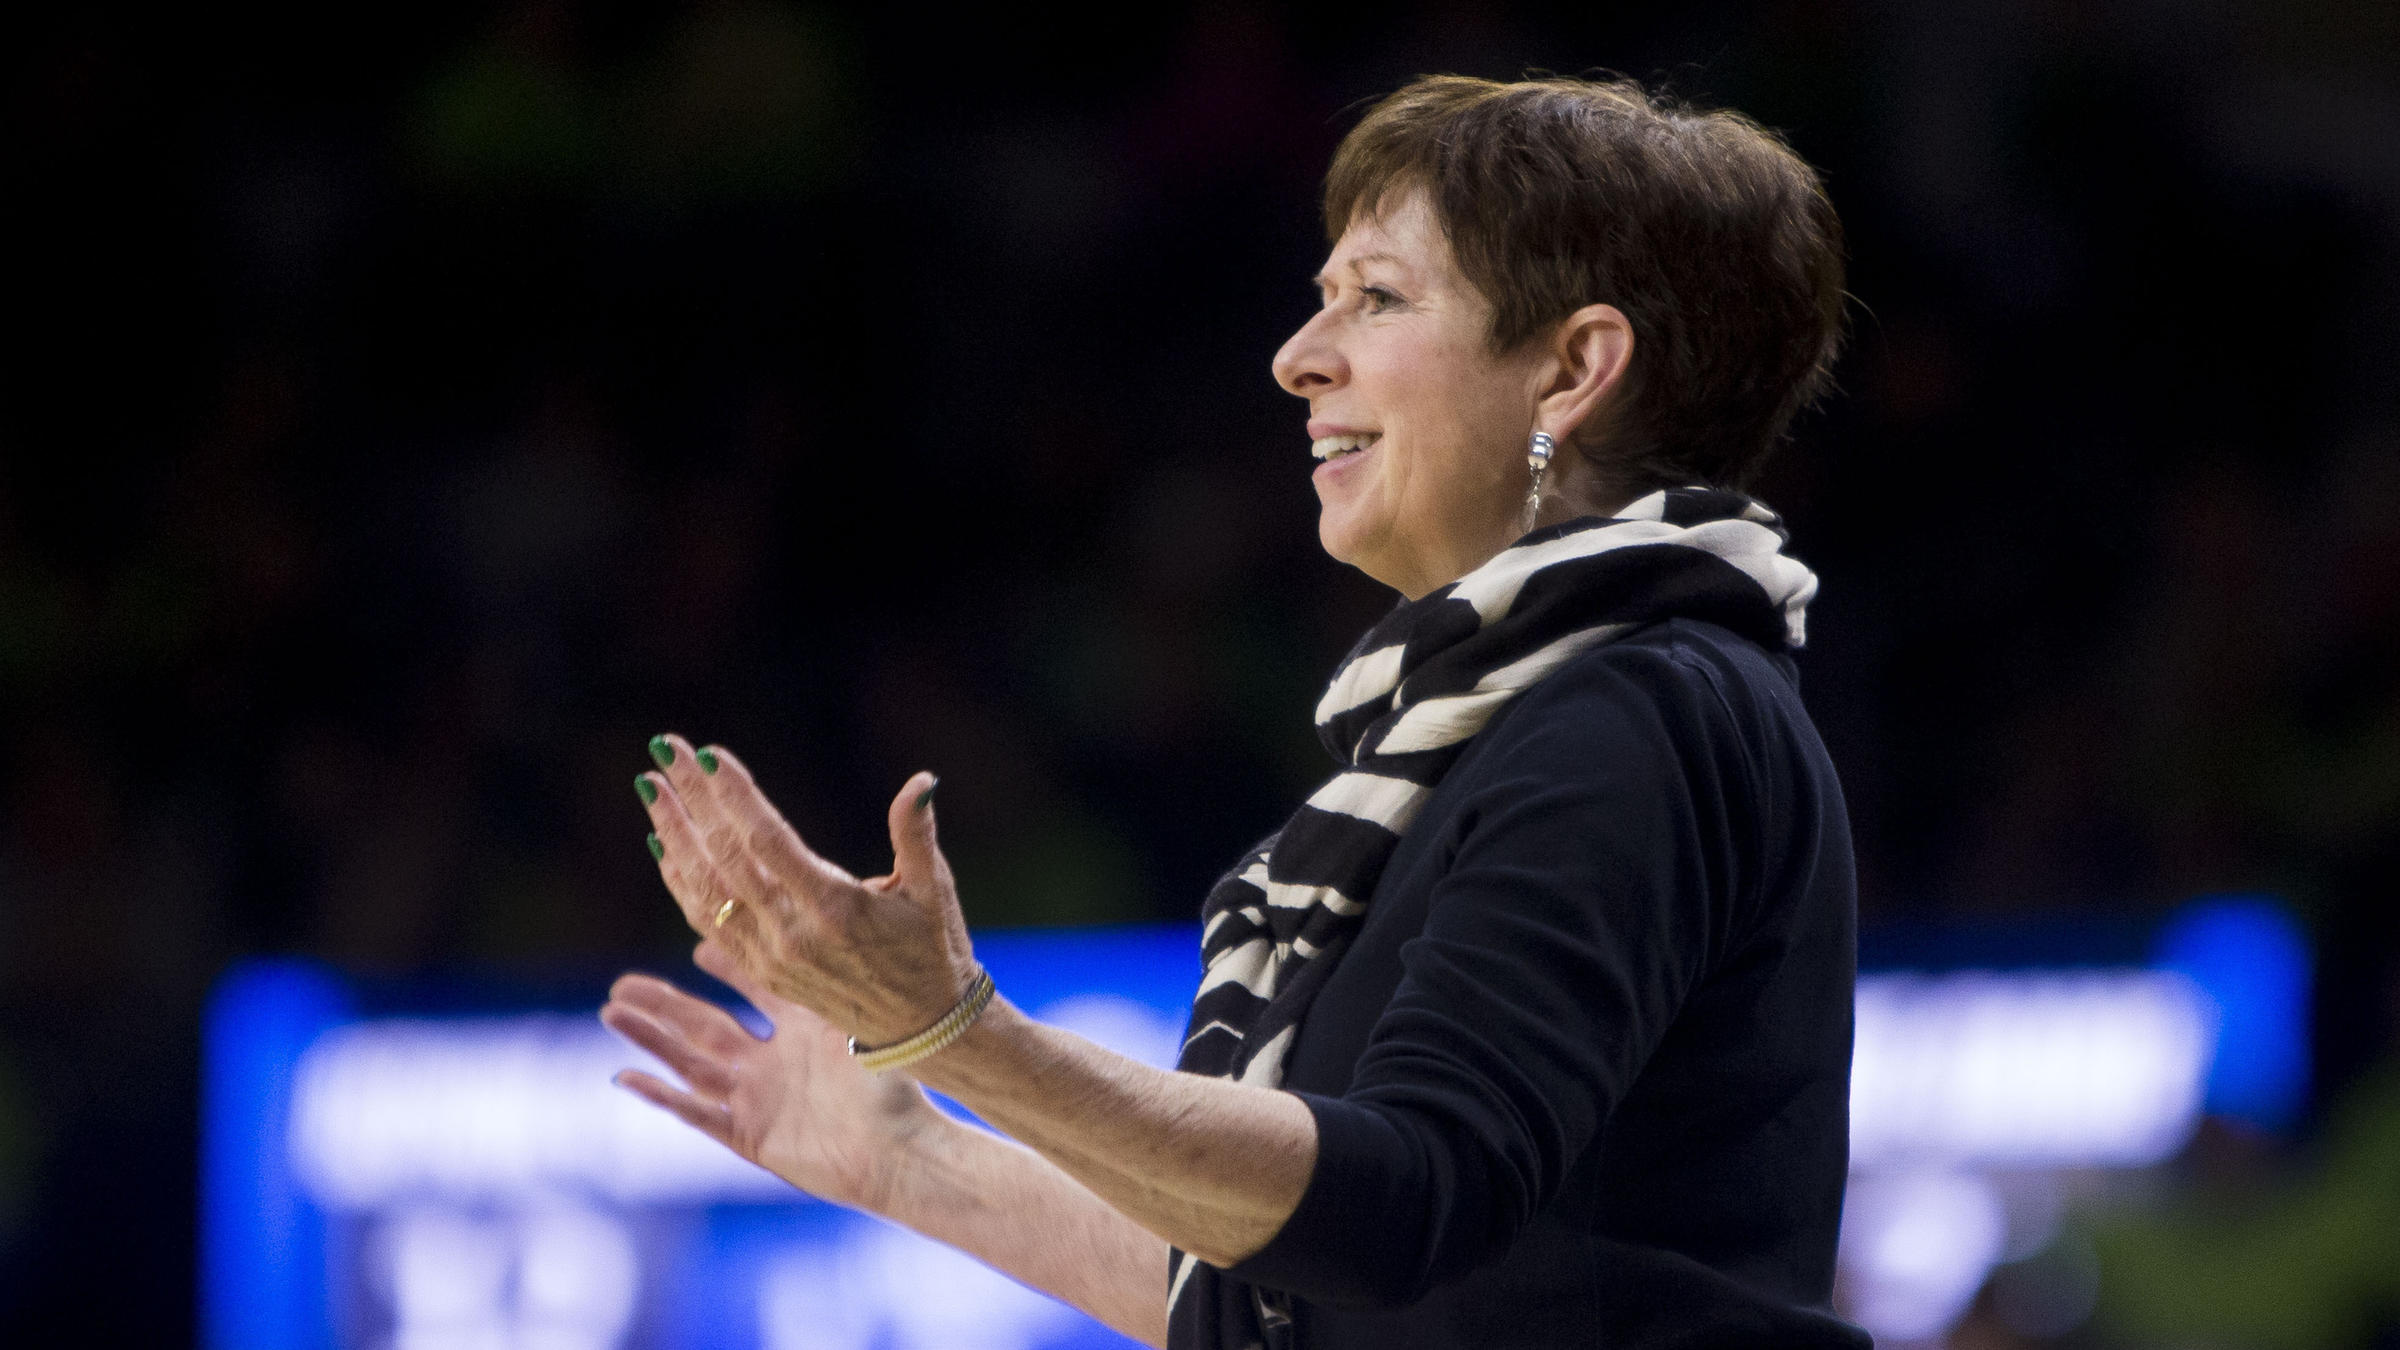 notre-dame-basketball-coach-muffet-mcgraw-wants-to-see-more-women